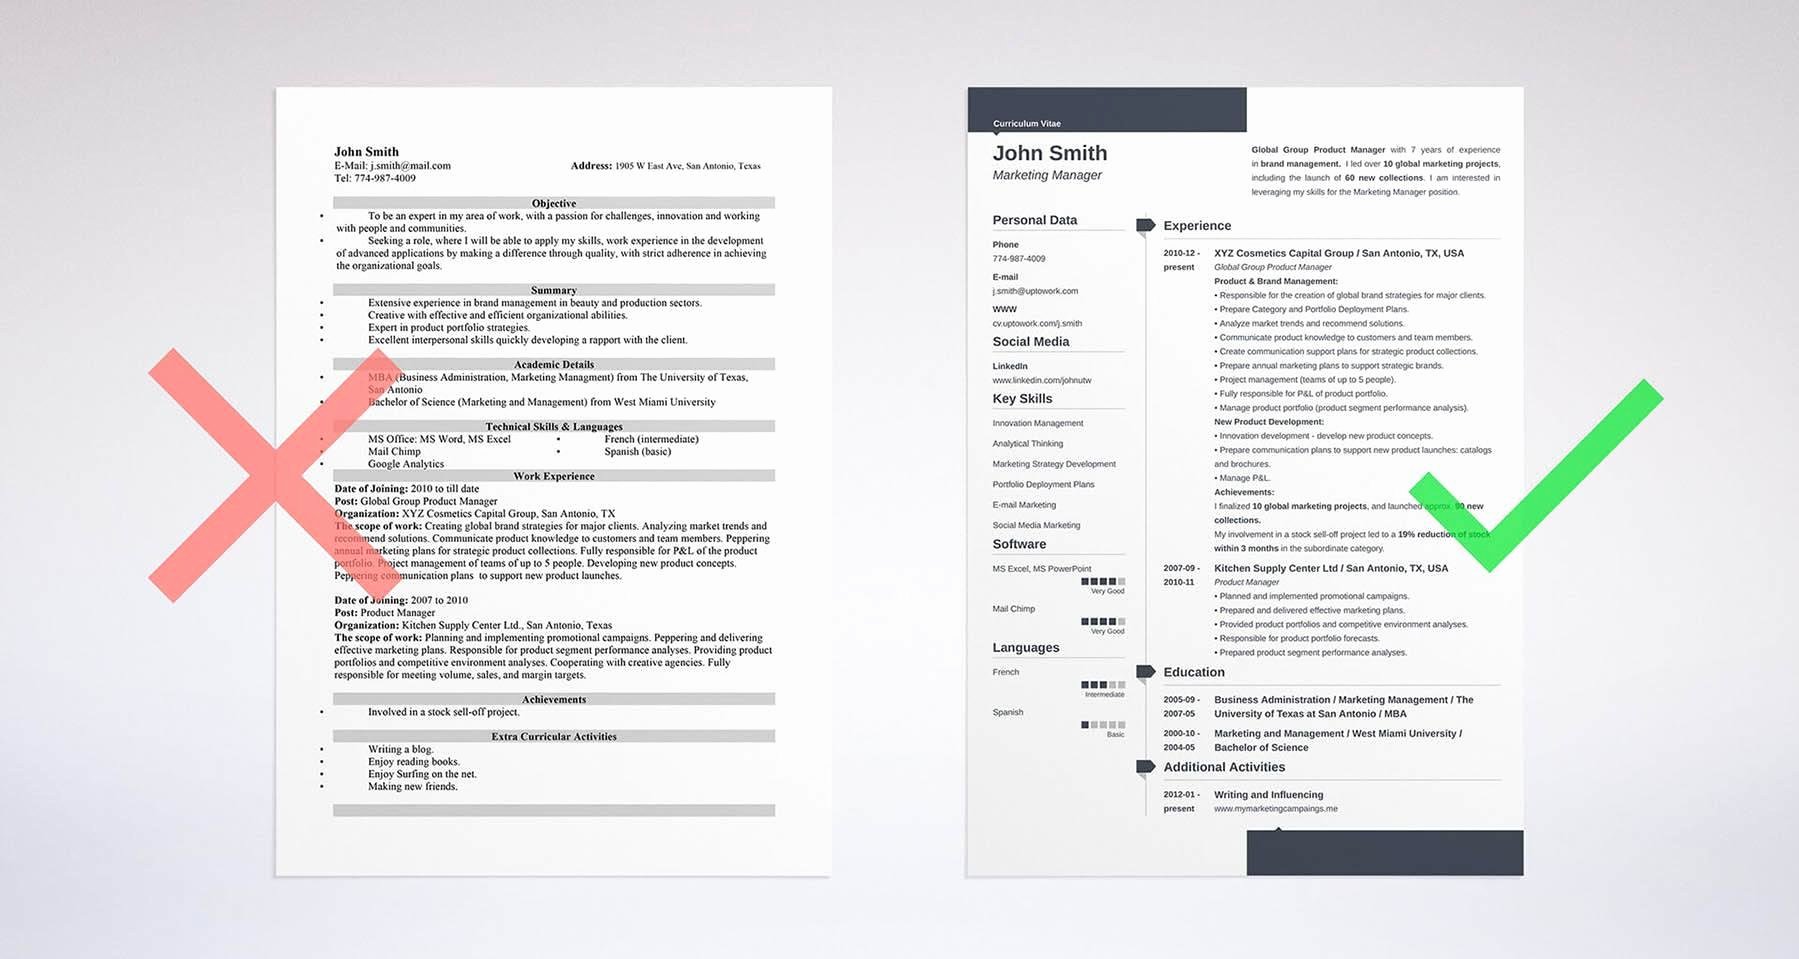 99 Key Skills for A Resume Best List Of Examples for All